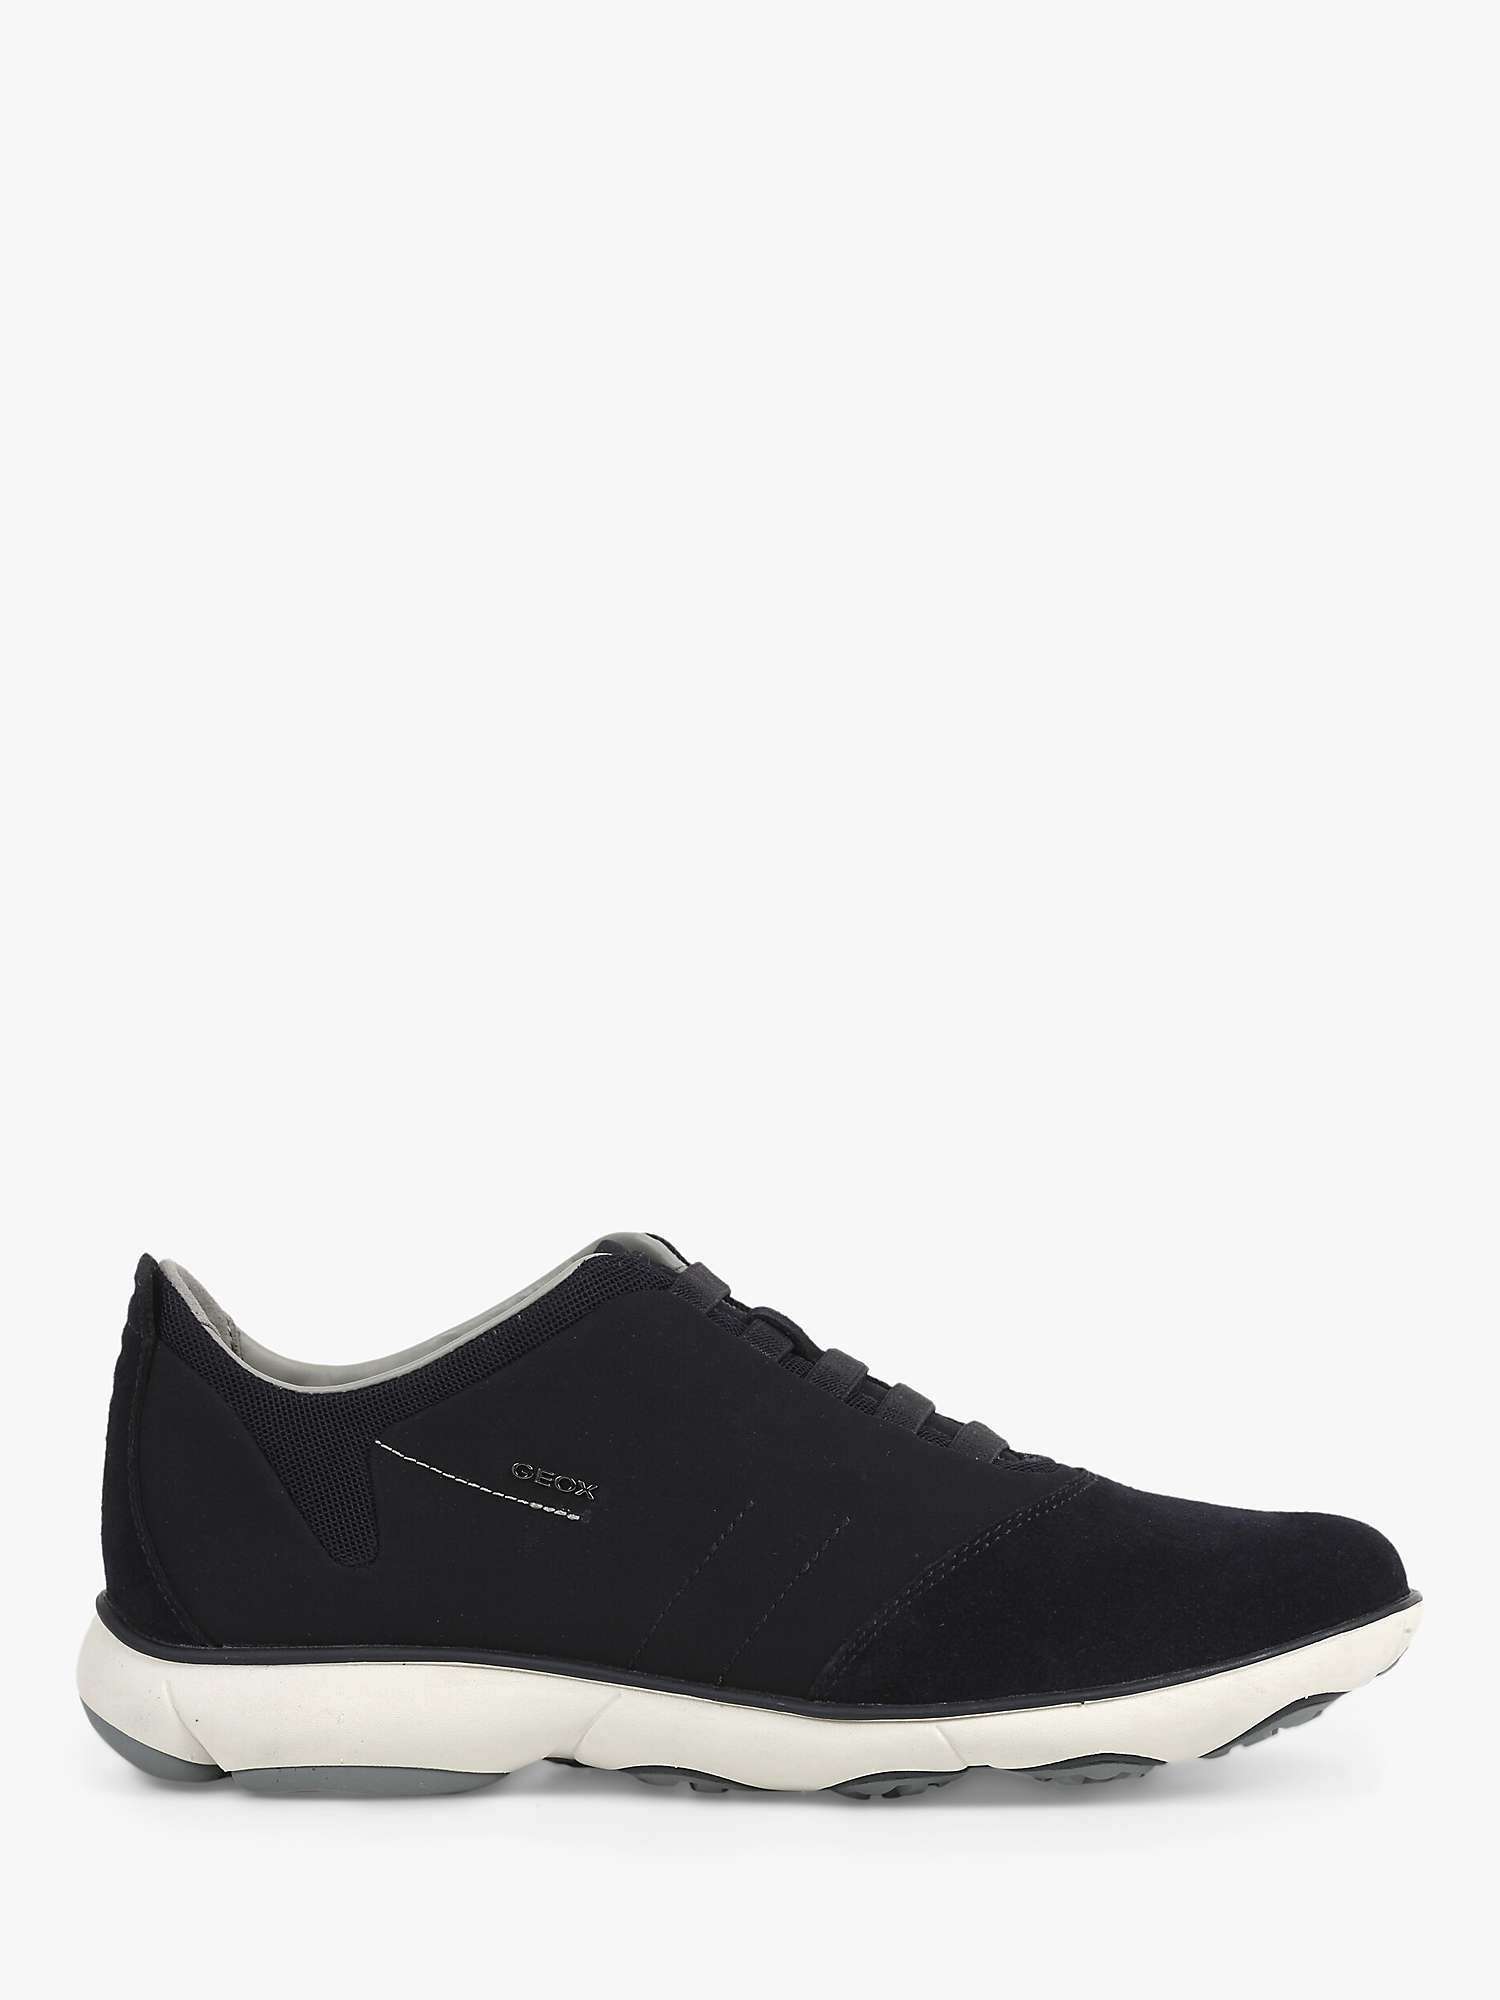 Buy Geox Nebula Trainers, Navy Online at johnlewis.com